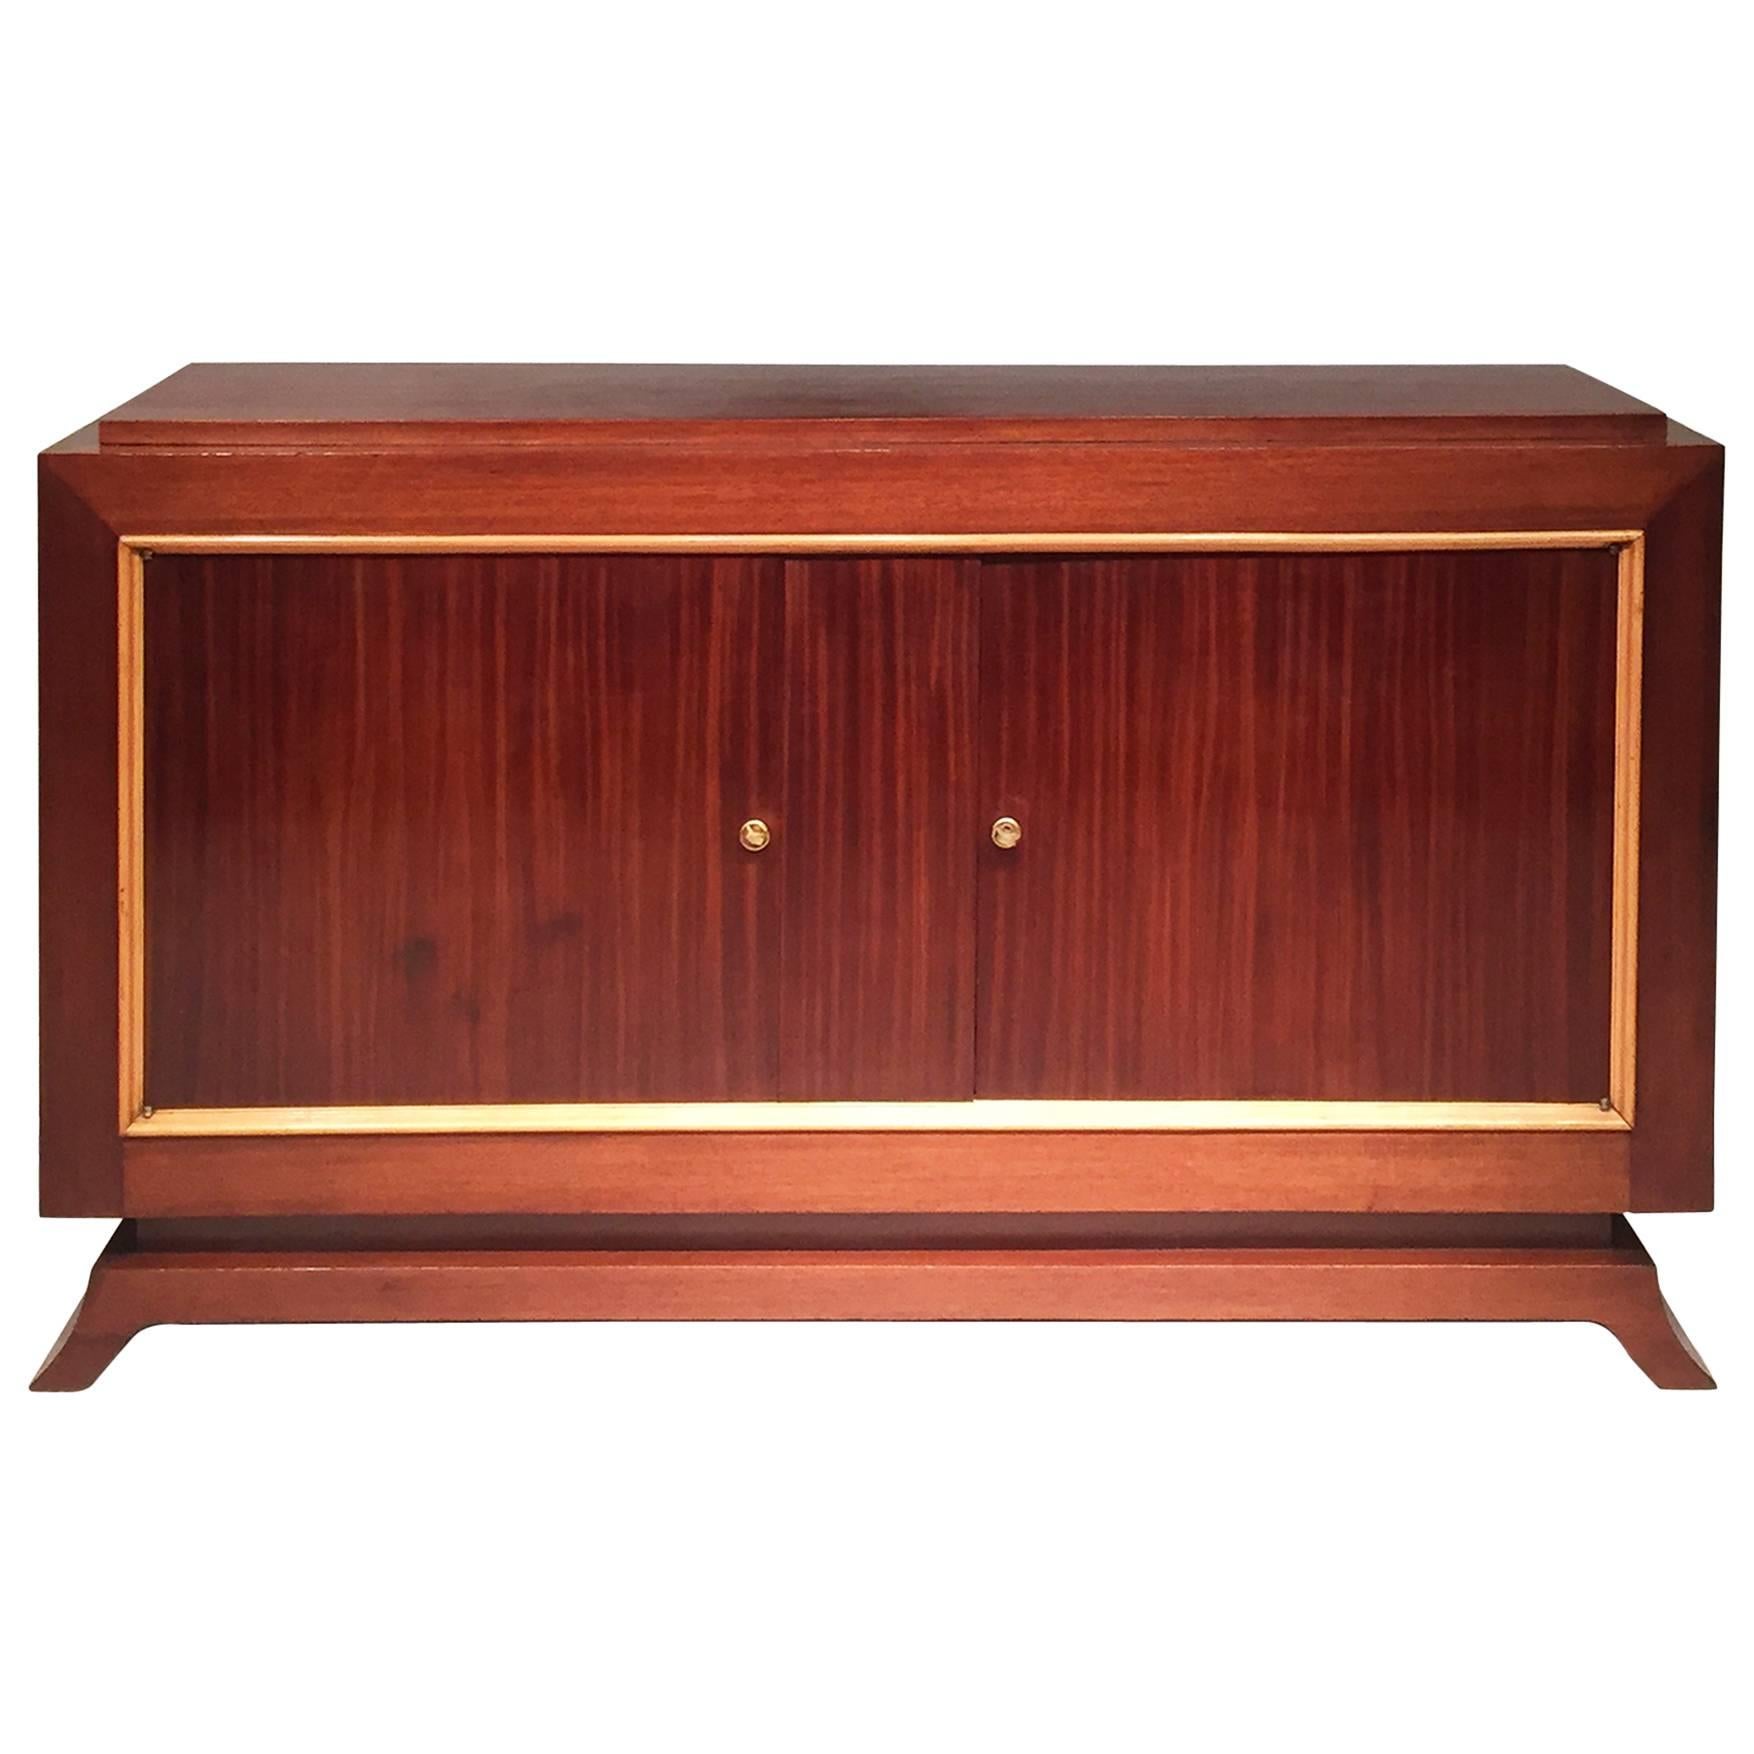 Important French Mahogany, Oak and Sycamore, 1940s Buffet Sideboard